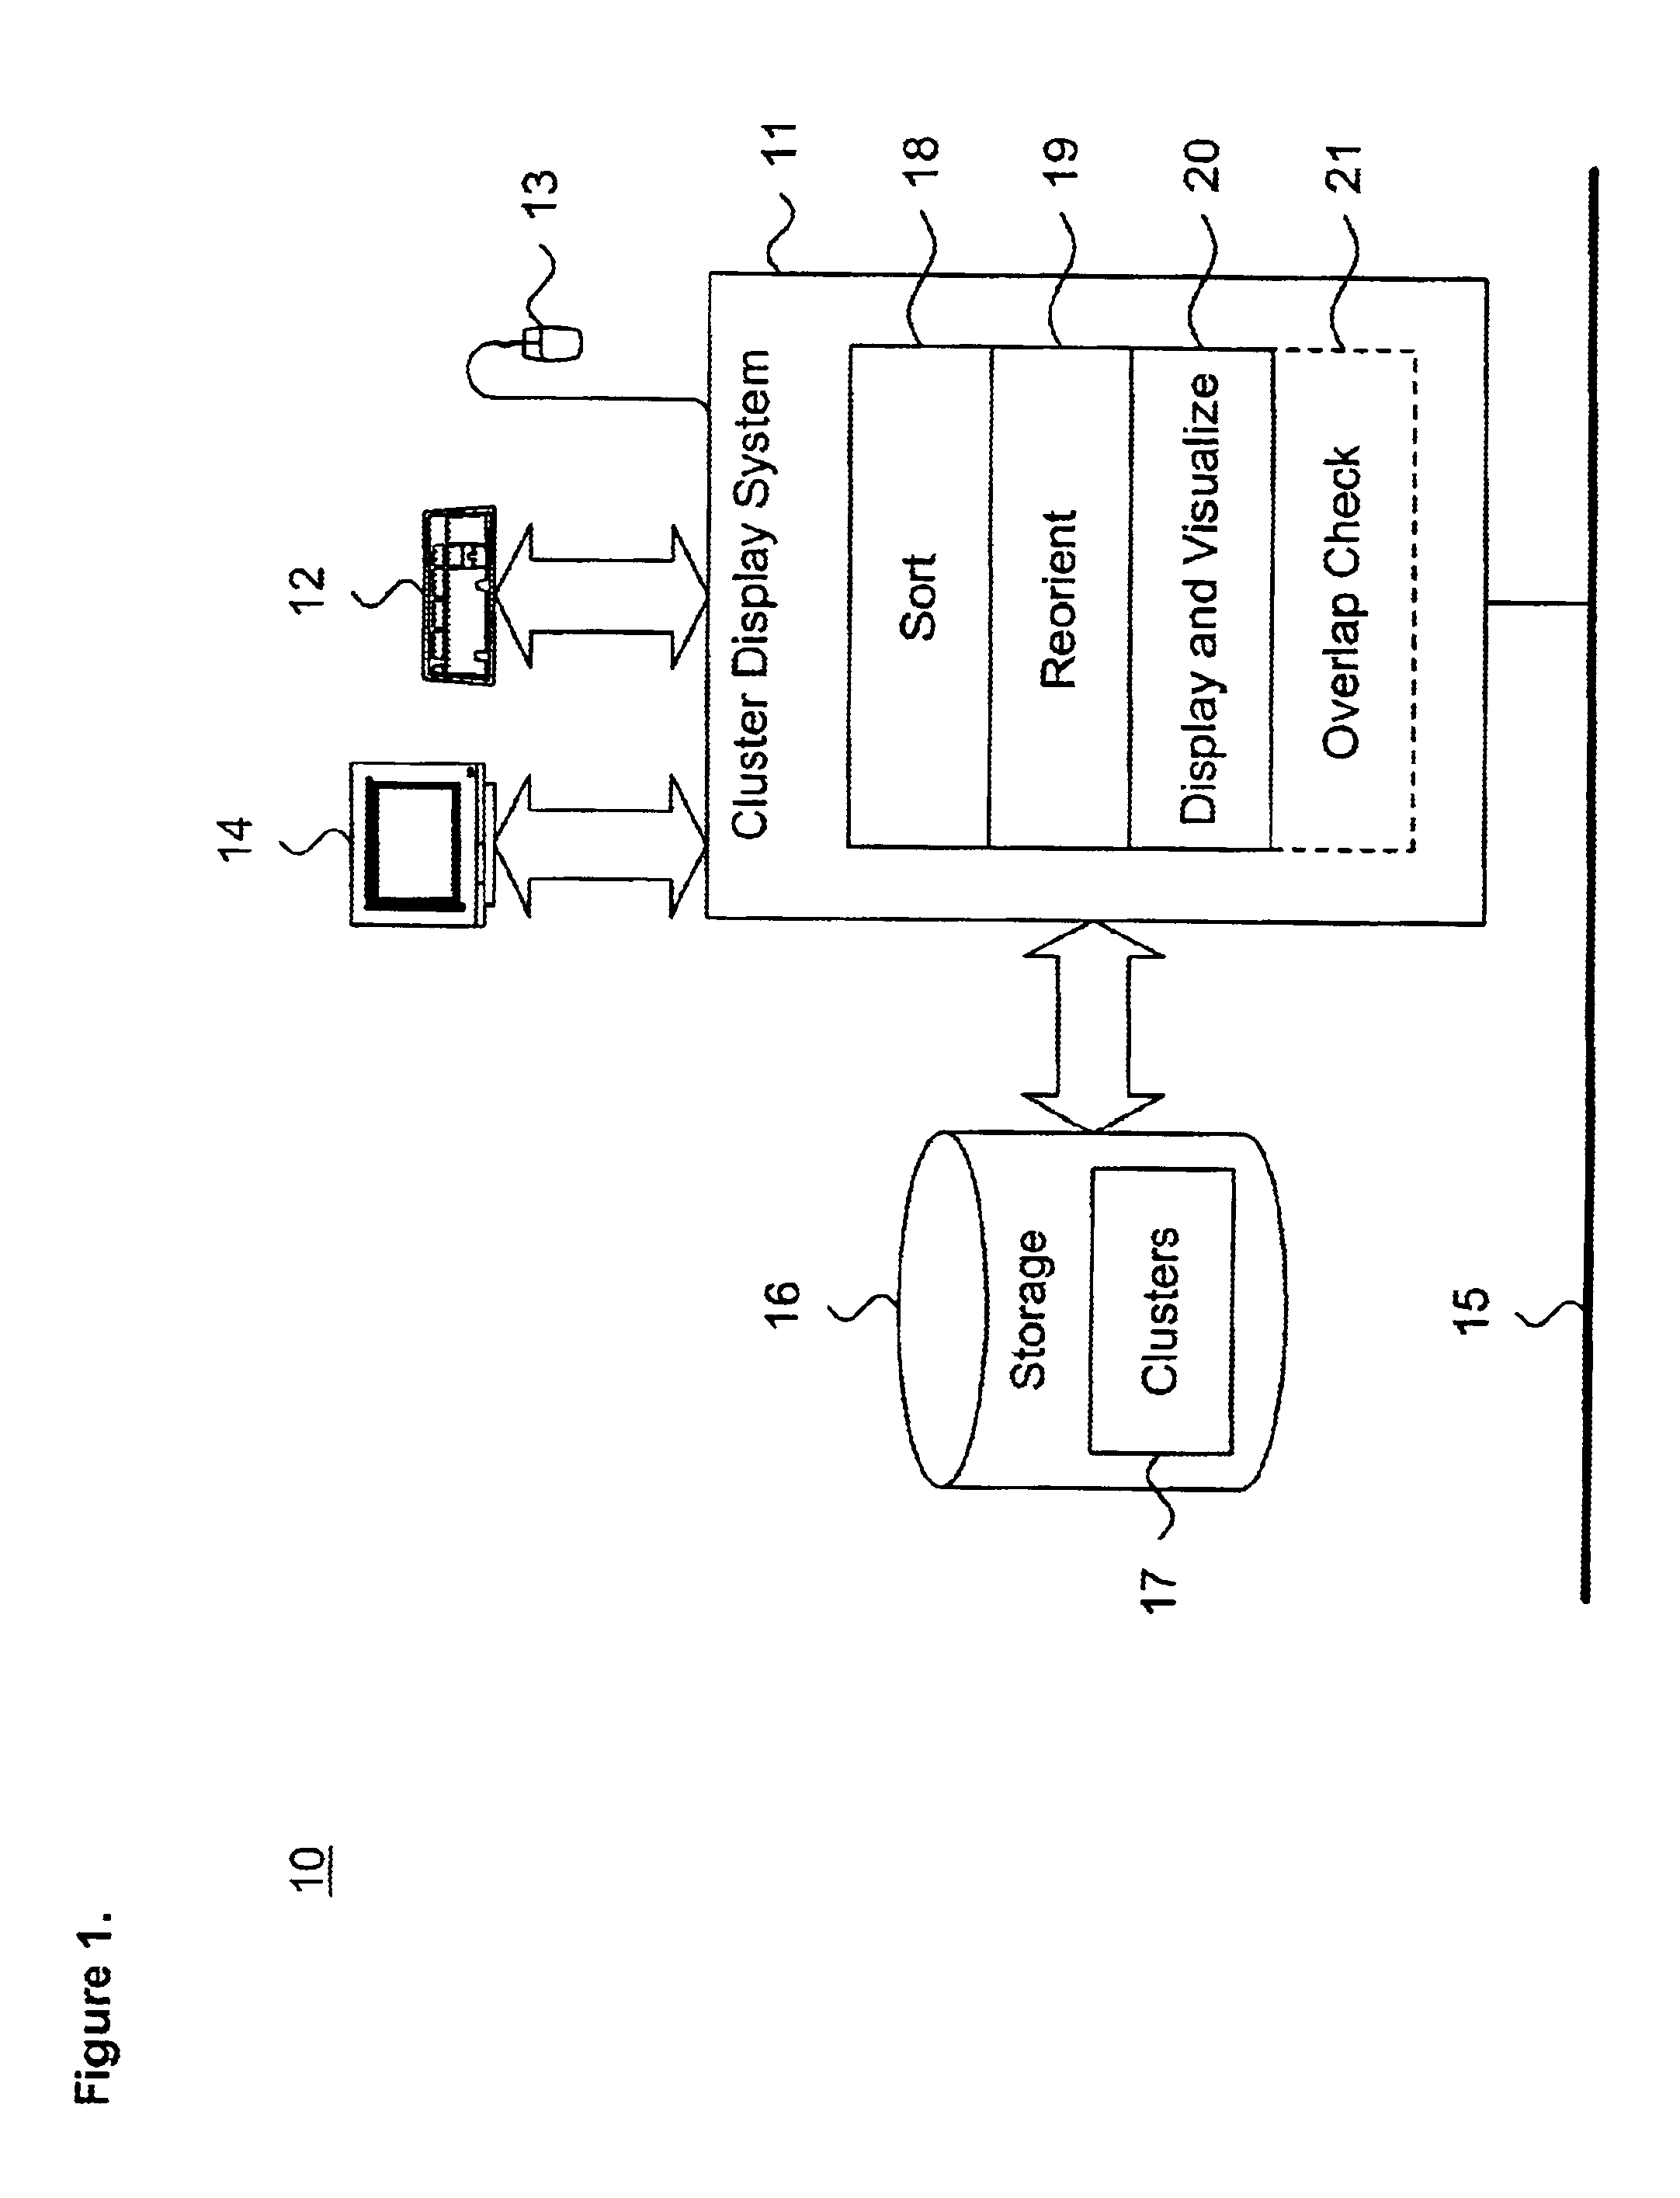 System and method for generating a visualized data representation preserving independent variable geometric relationships